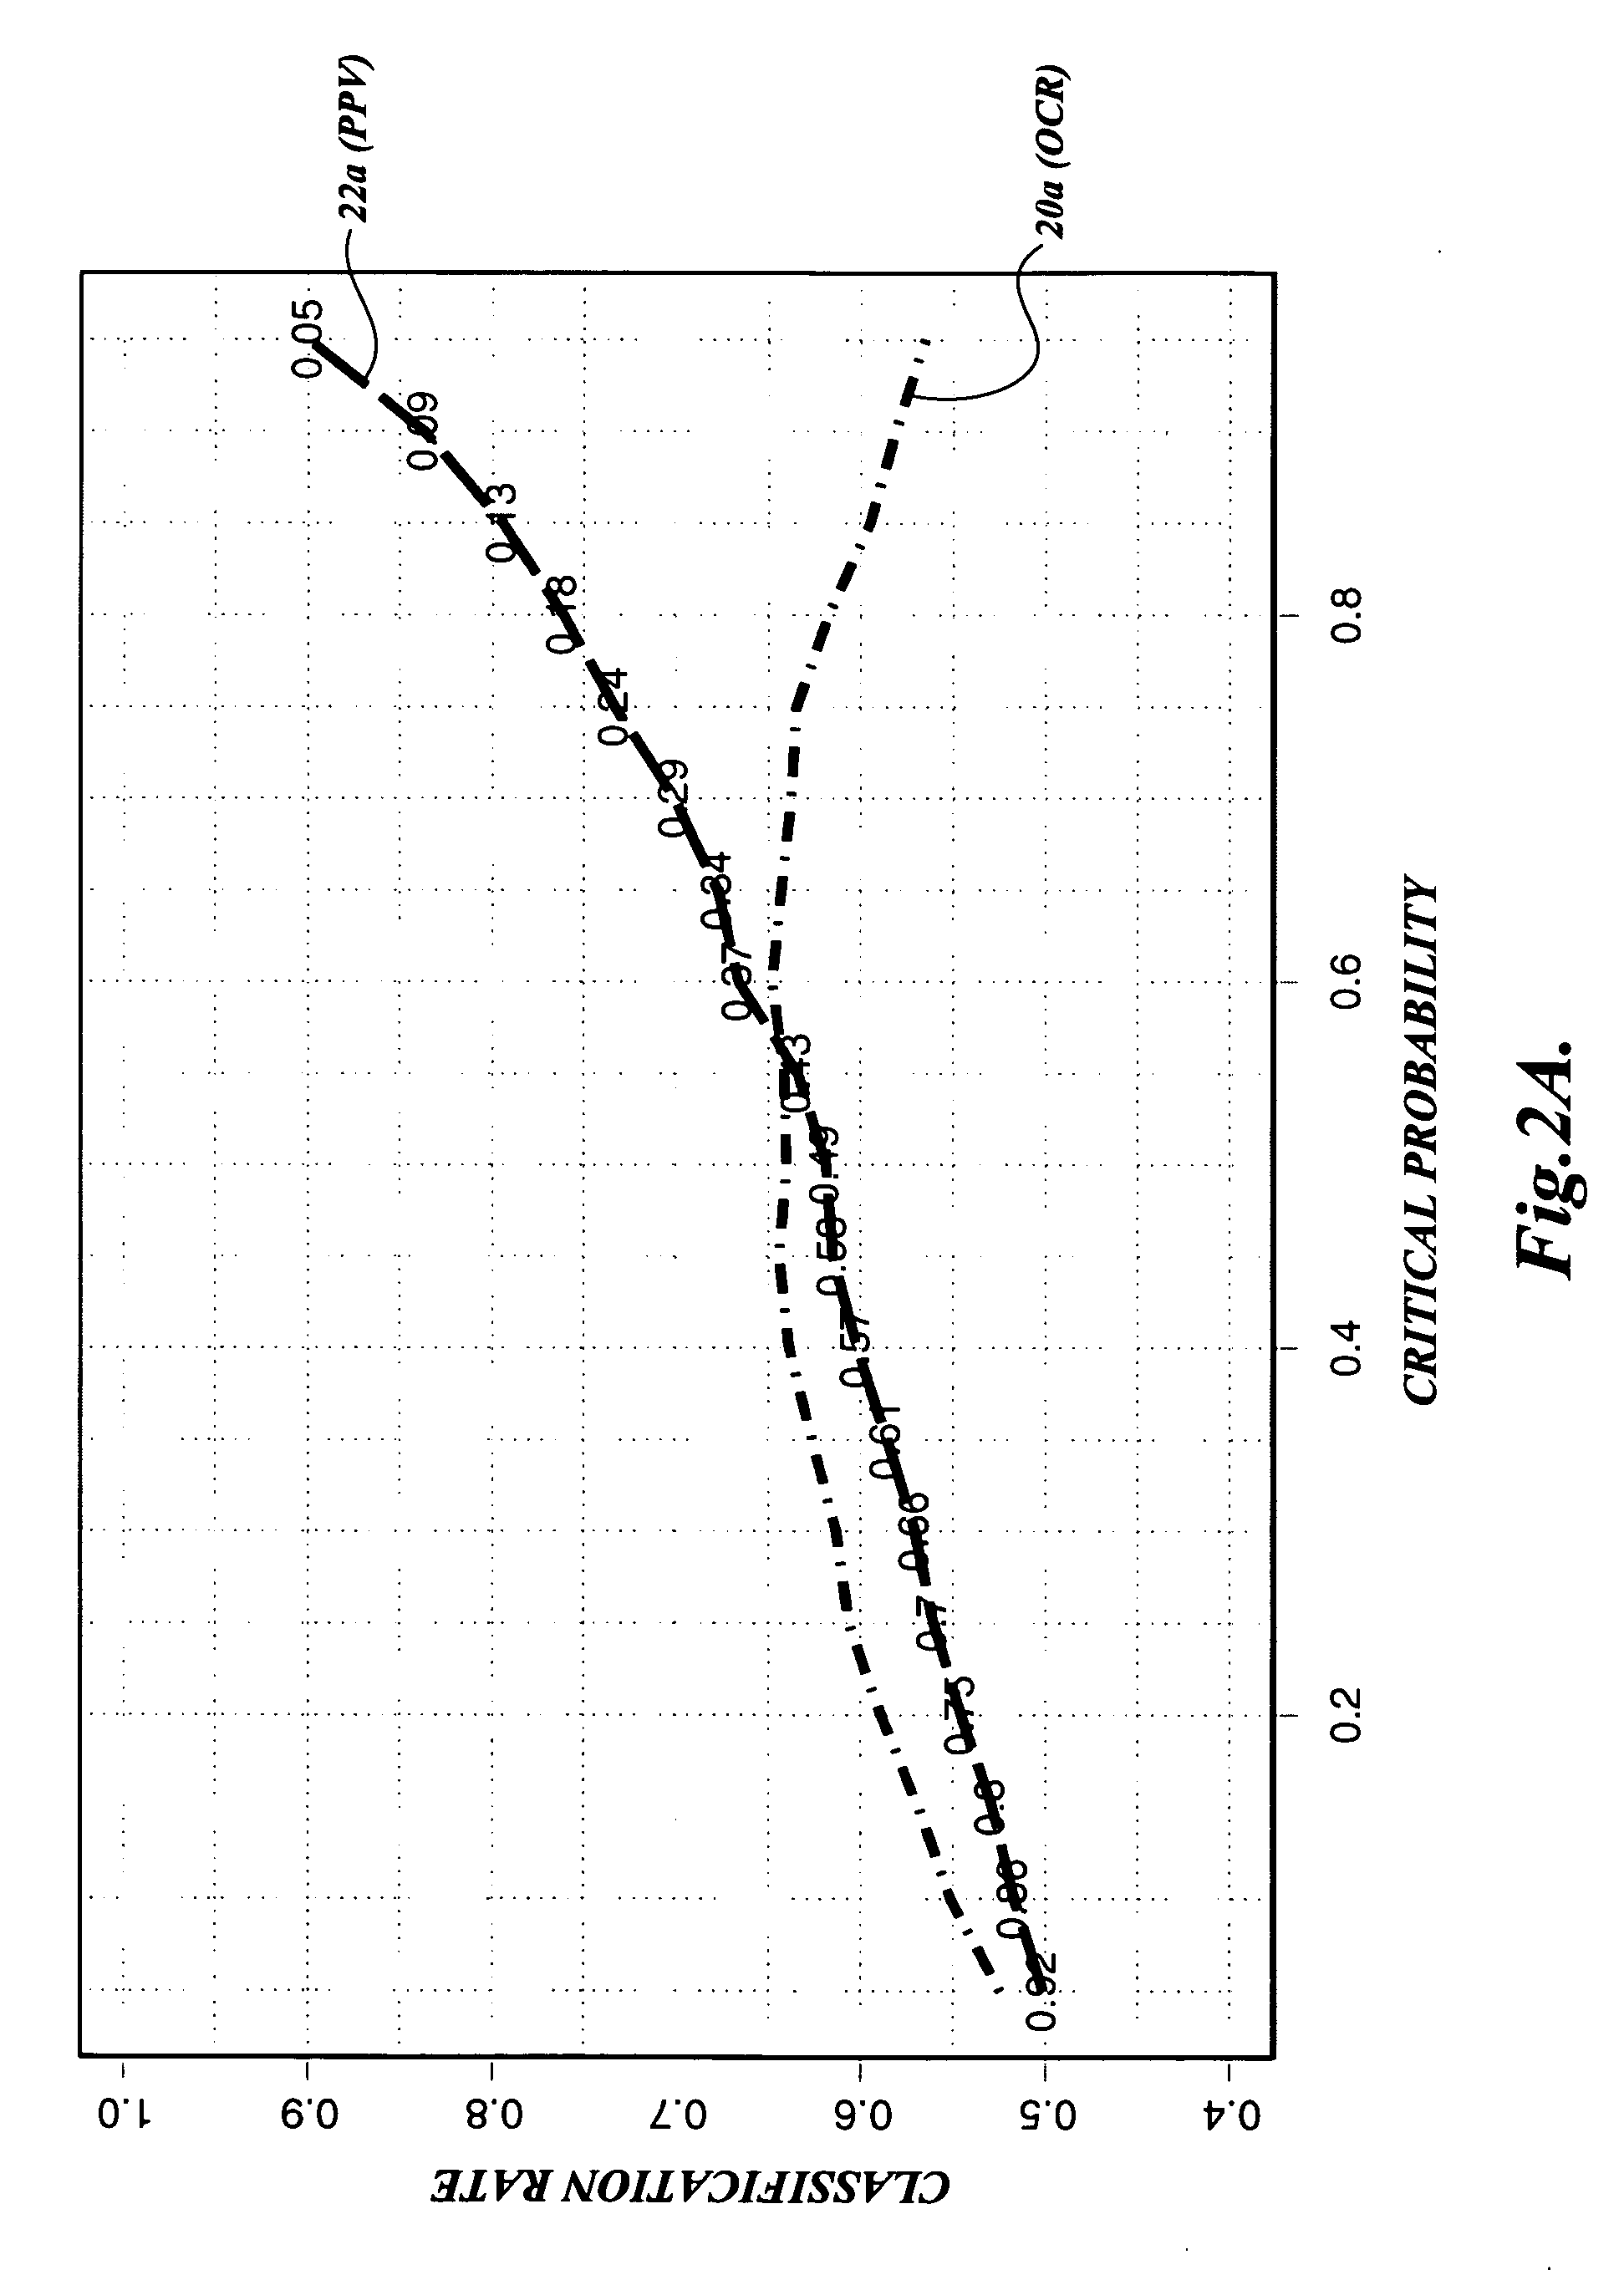 Method of classifying plant embryos using penalized logistic regression